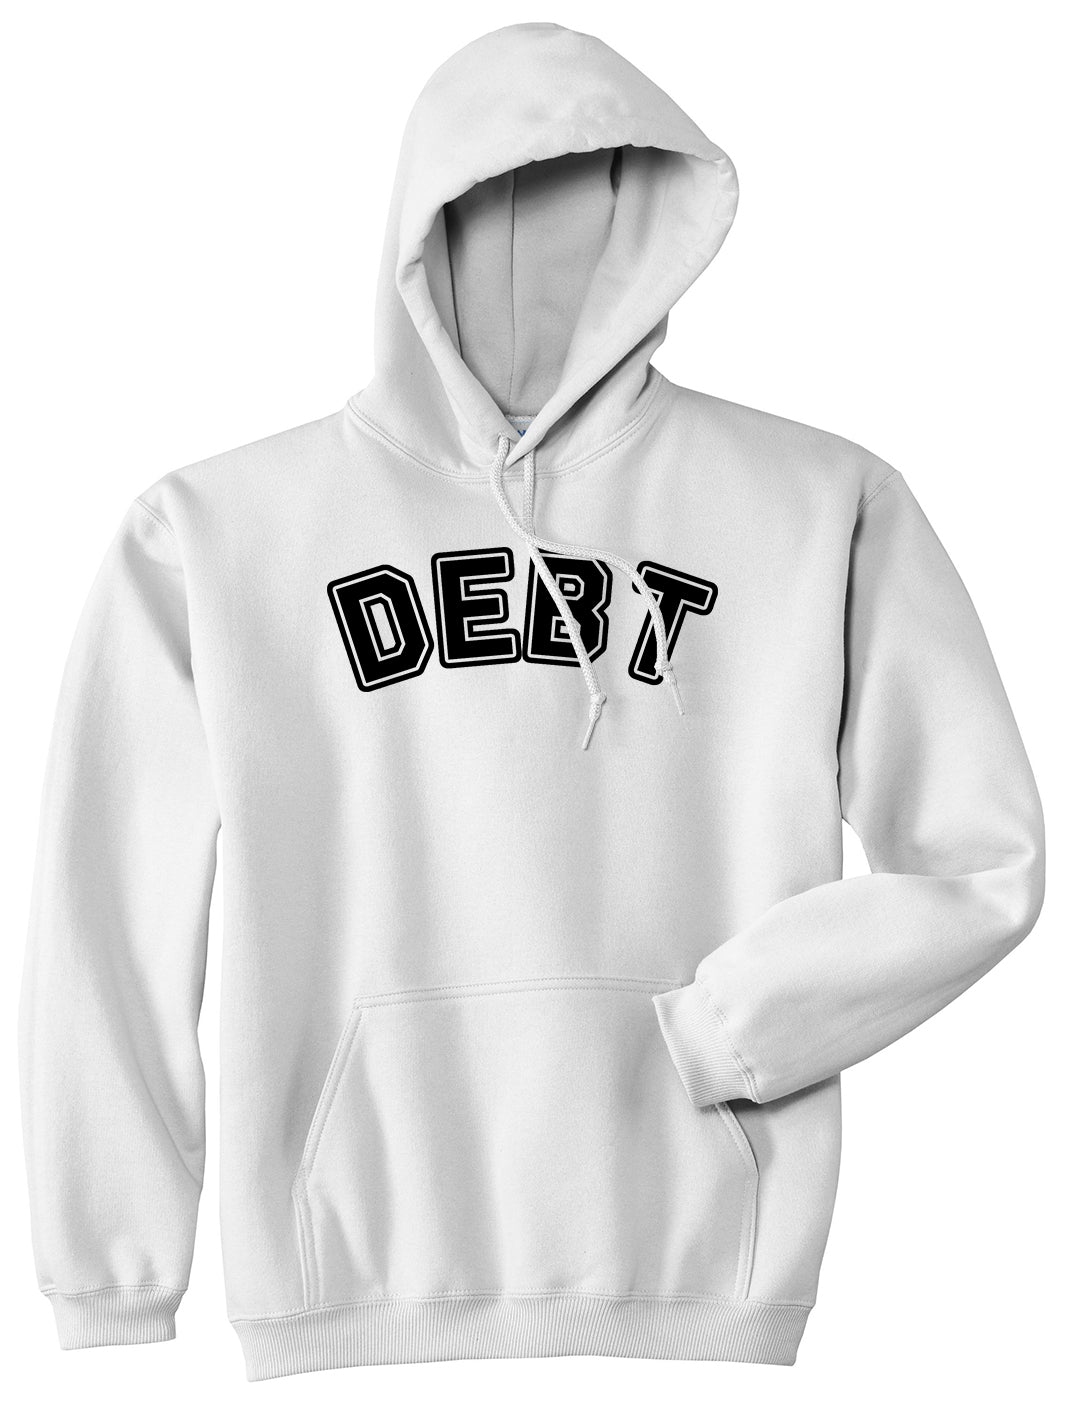 Debt Life Pullover Hoodie in White